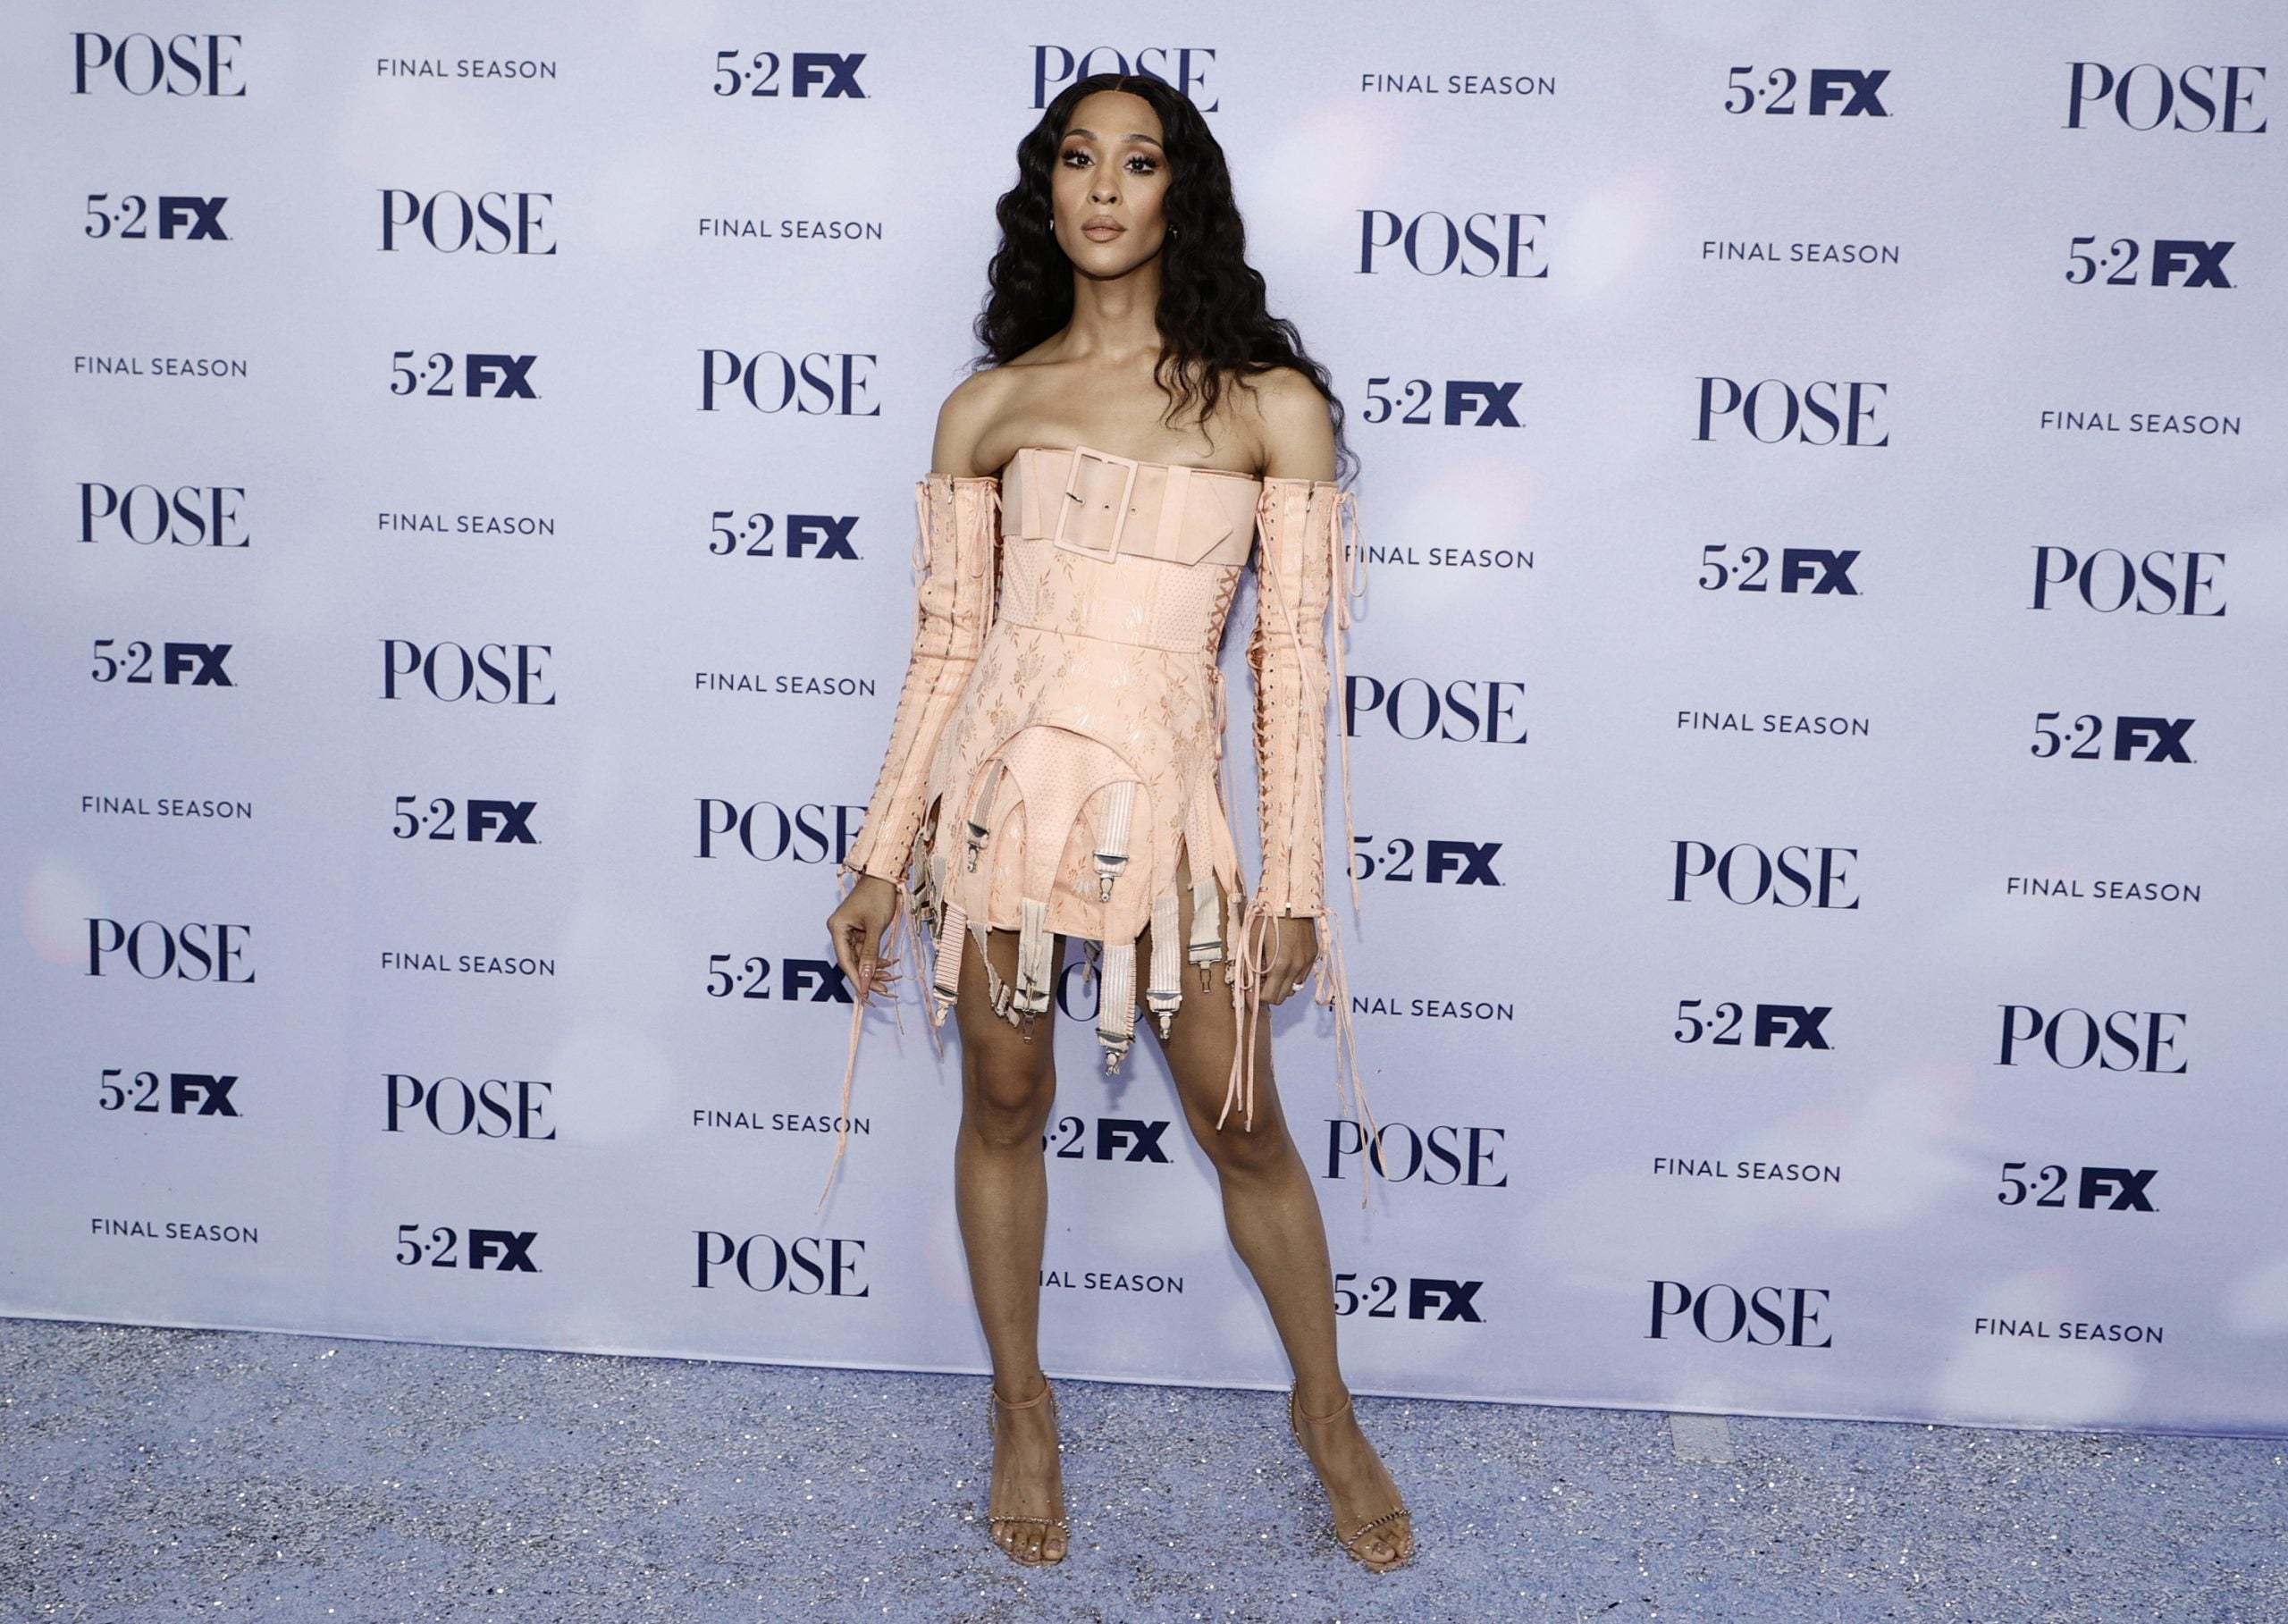 Michaela Jaé Rodriguez Is Making History In Style – Here Are Her Best Fashion Moments